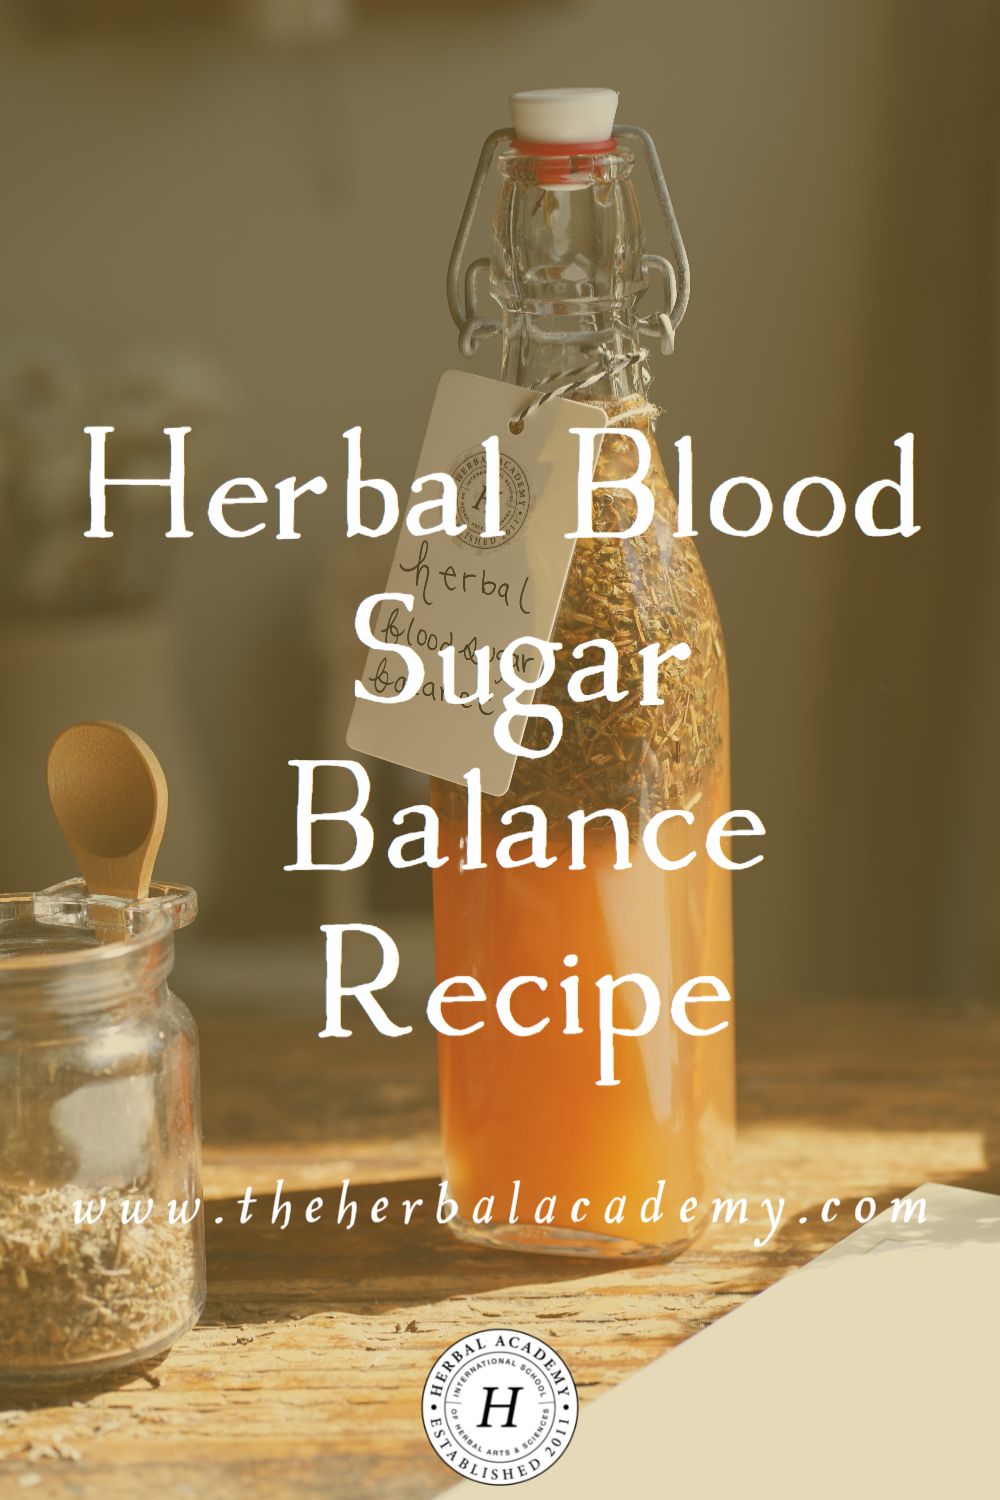 Herbal Blood Sugar Balance Recipe | Herbal Academy | Is blood sugar balance affecting your daily function? Give this Herbal Blood Sugar Balance recipe a try for helpful support.